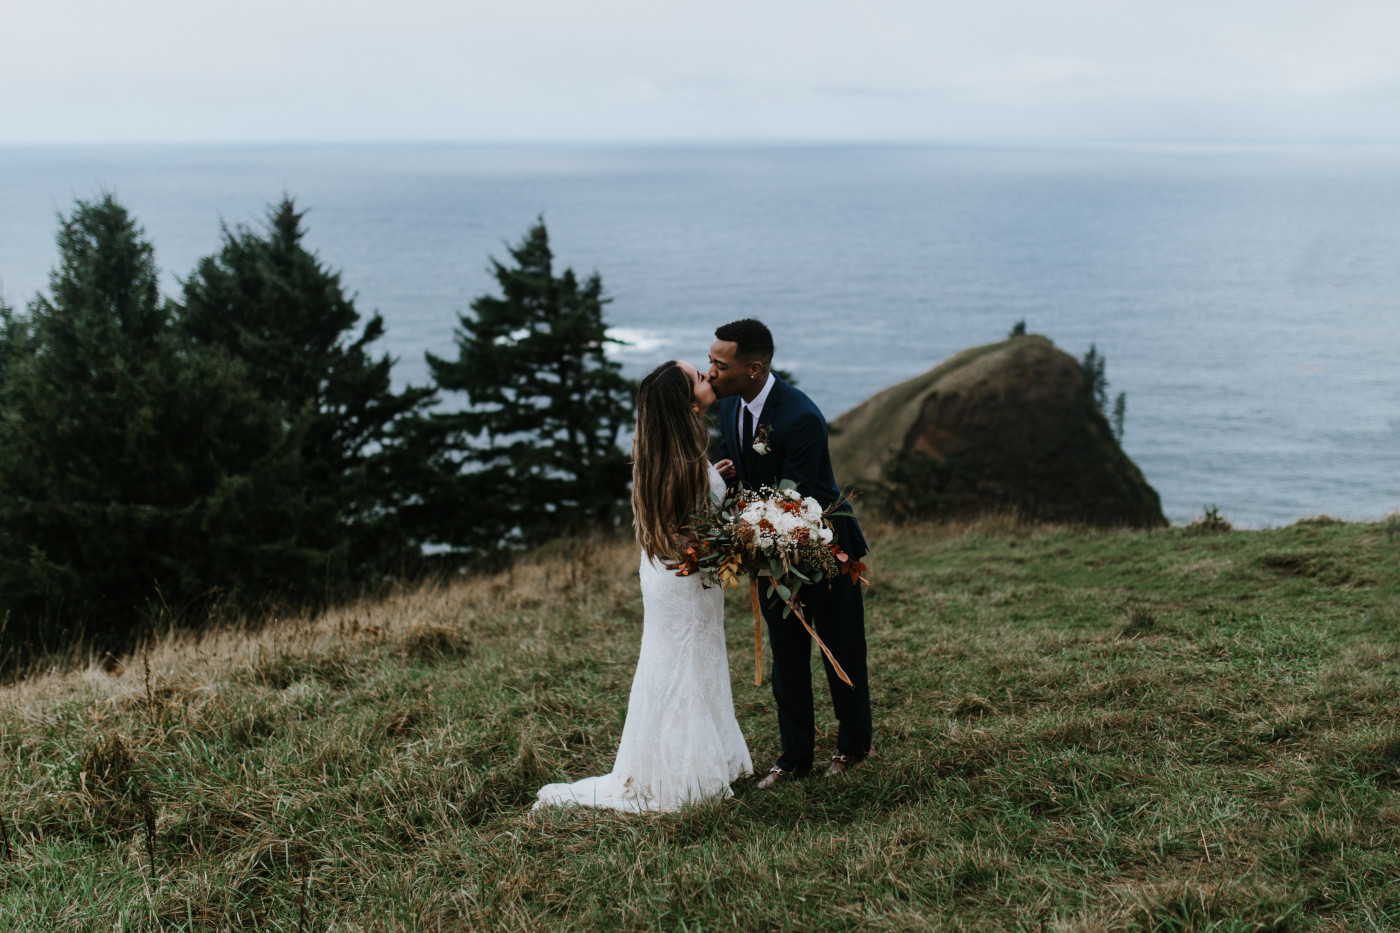 Deandre and Ariana kiss near the Oregon coast. Elopement photography at Mount Hood by Sienna Plus Josh.